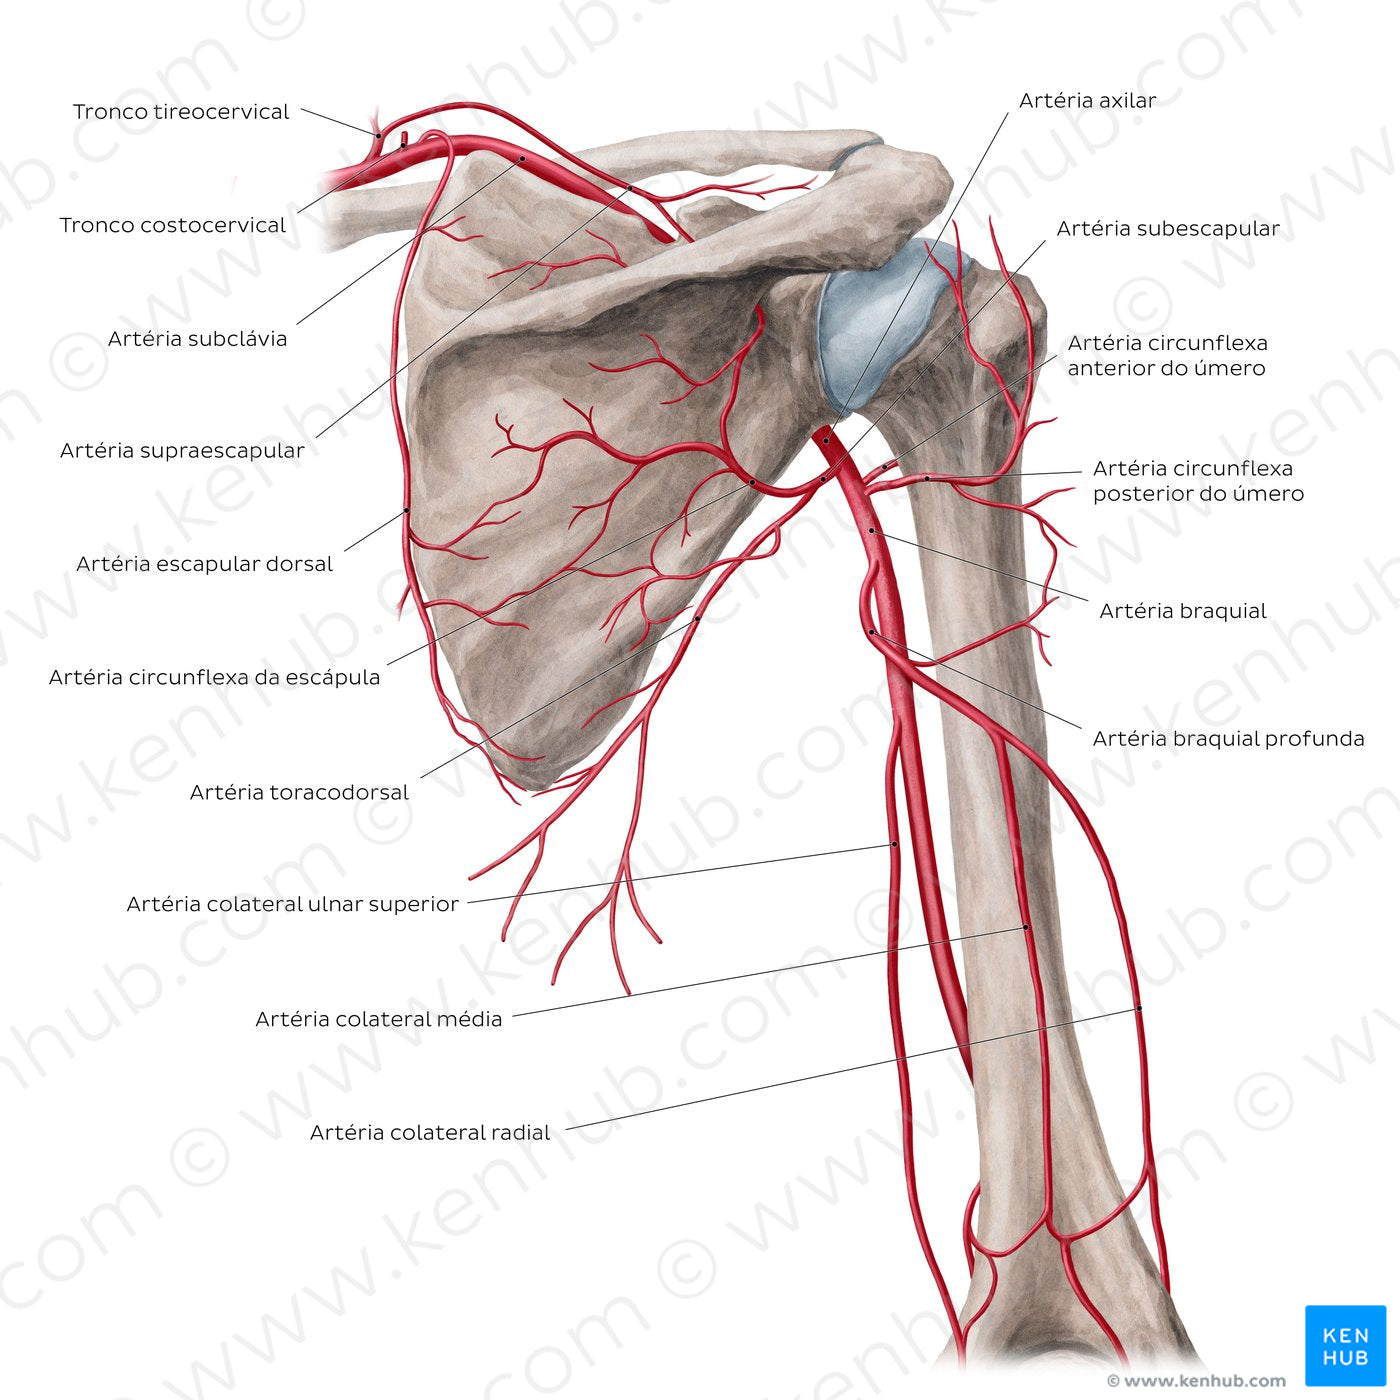 Arteries of the arm and the shoulder - Posterior view (Portuguese)